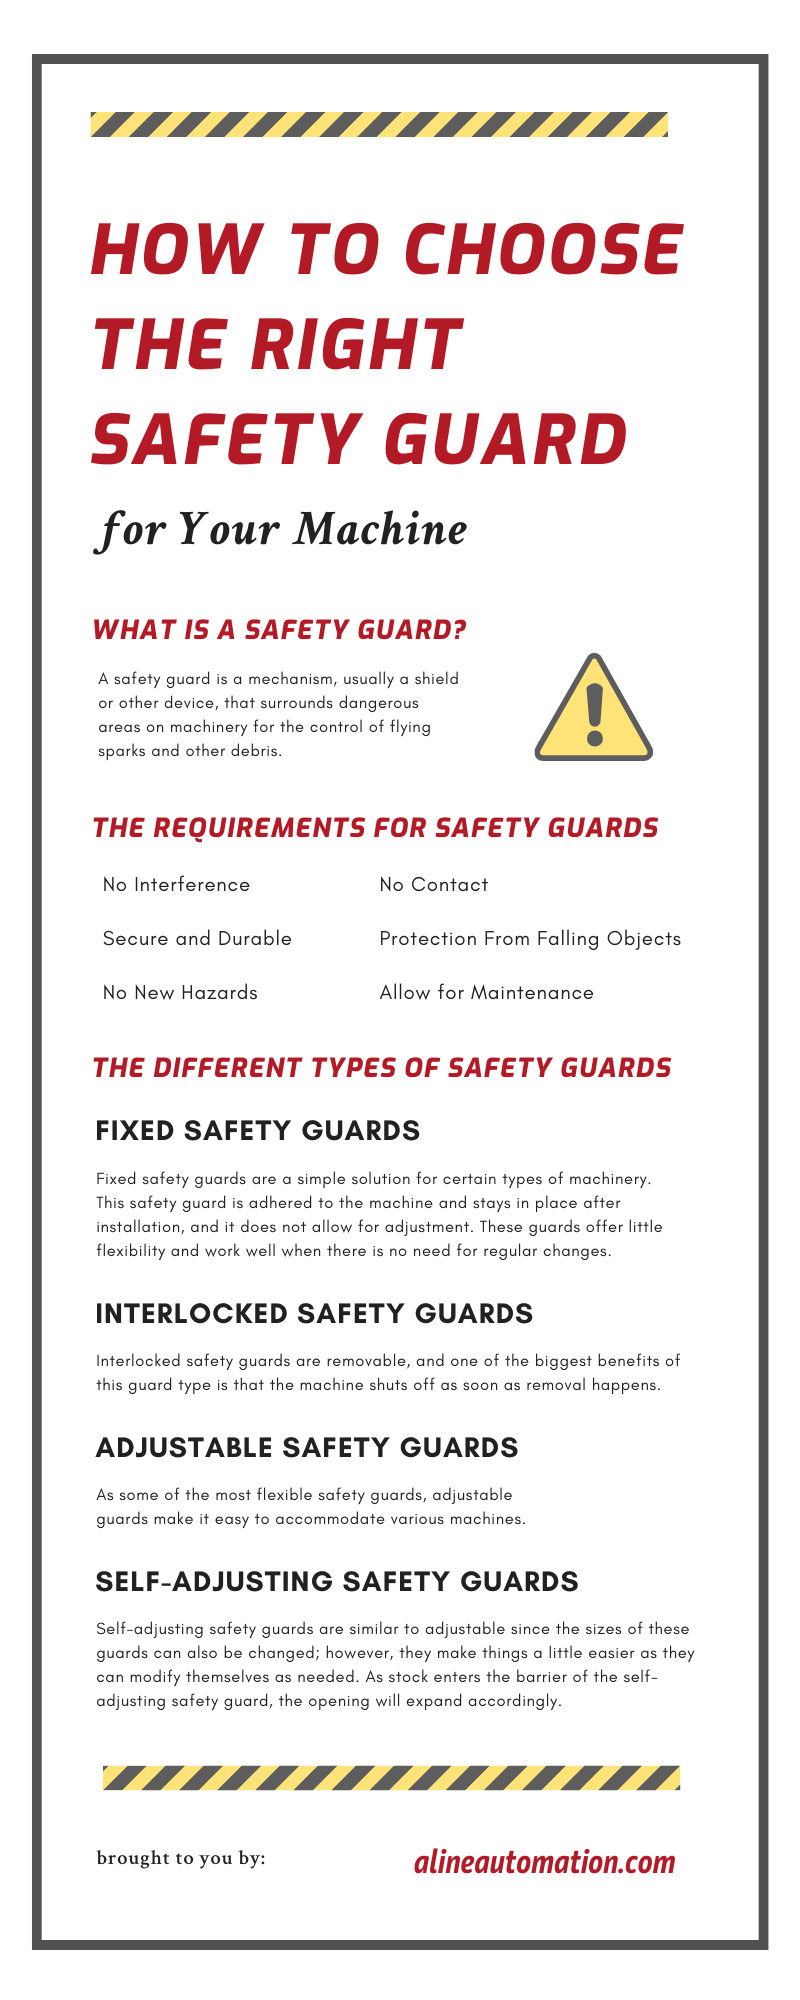 how to choose the right safety guard for your machine